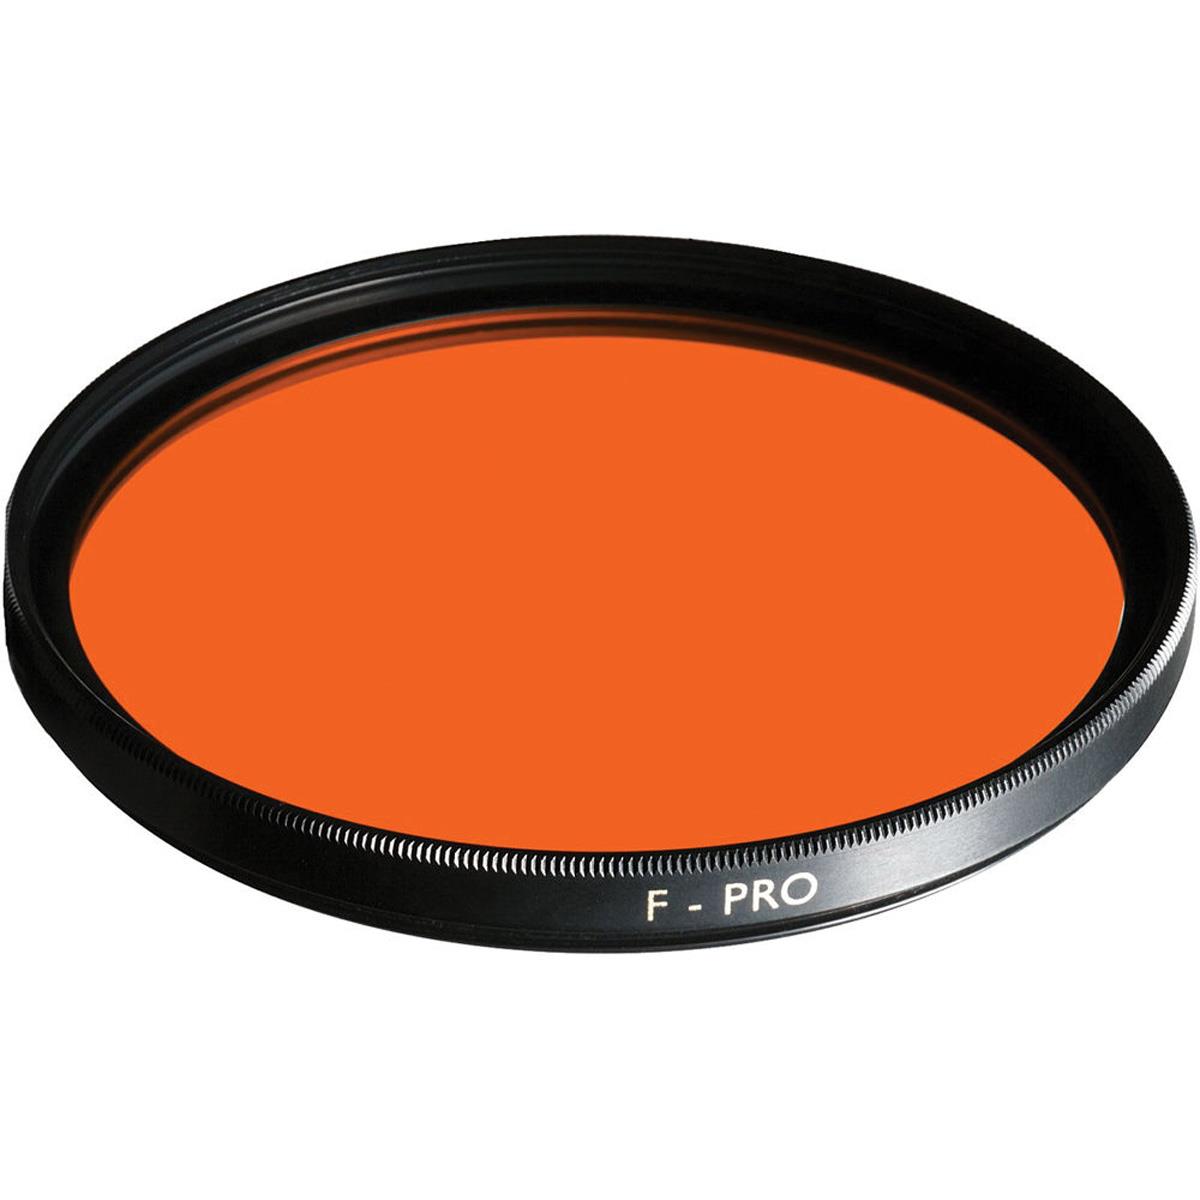 Image of B + W 55mm 040 Filter